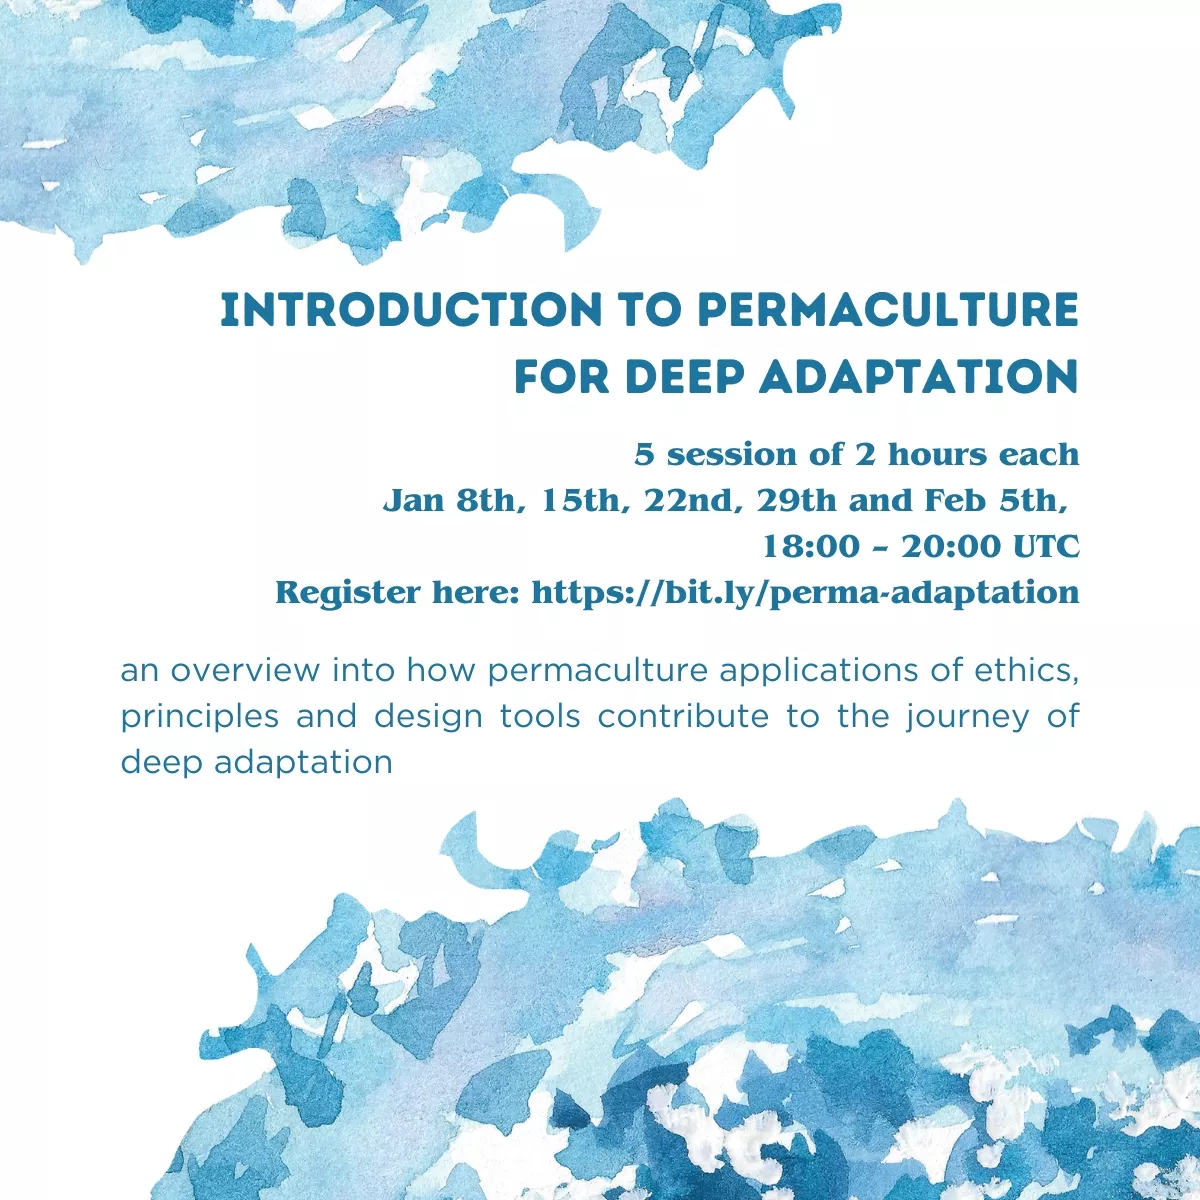 Introduction to Permaculture for Deep Adaptation